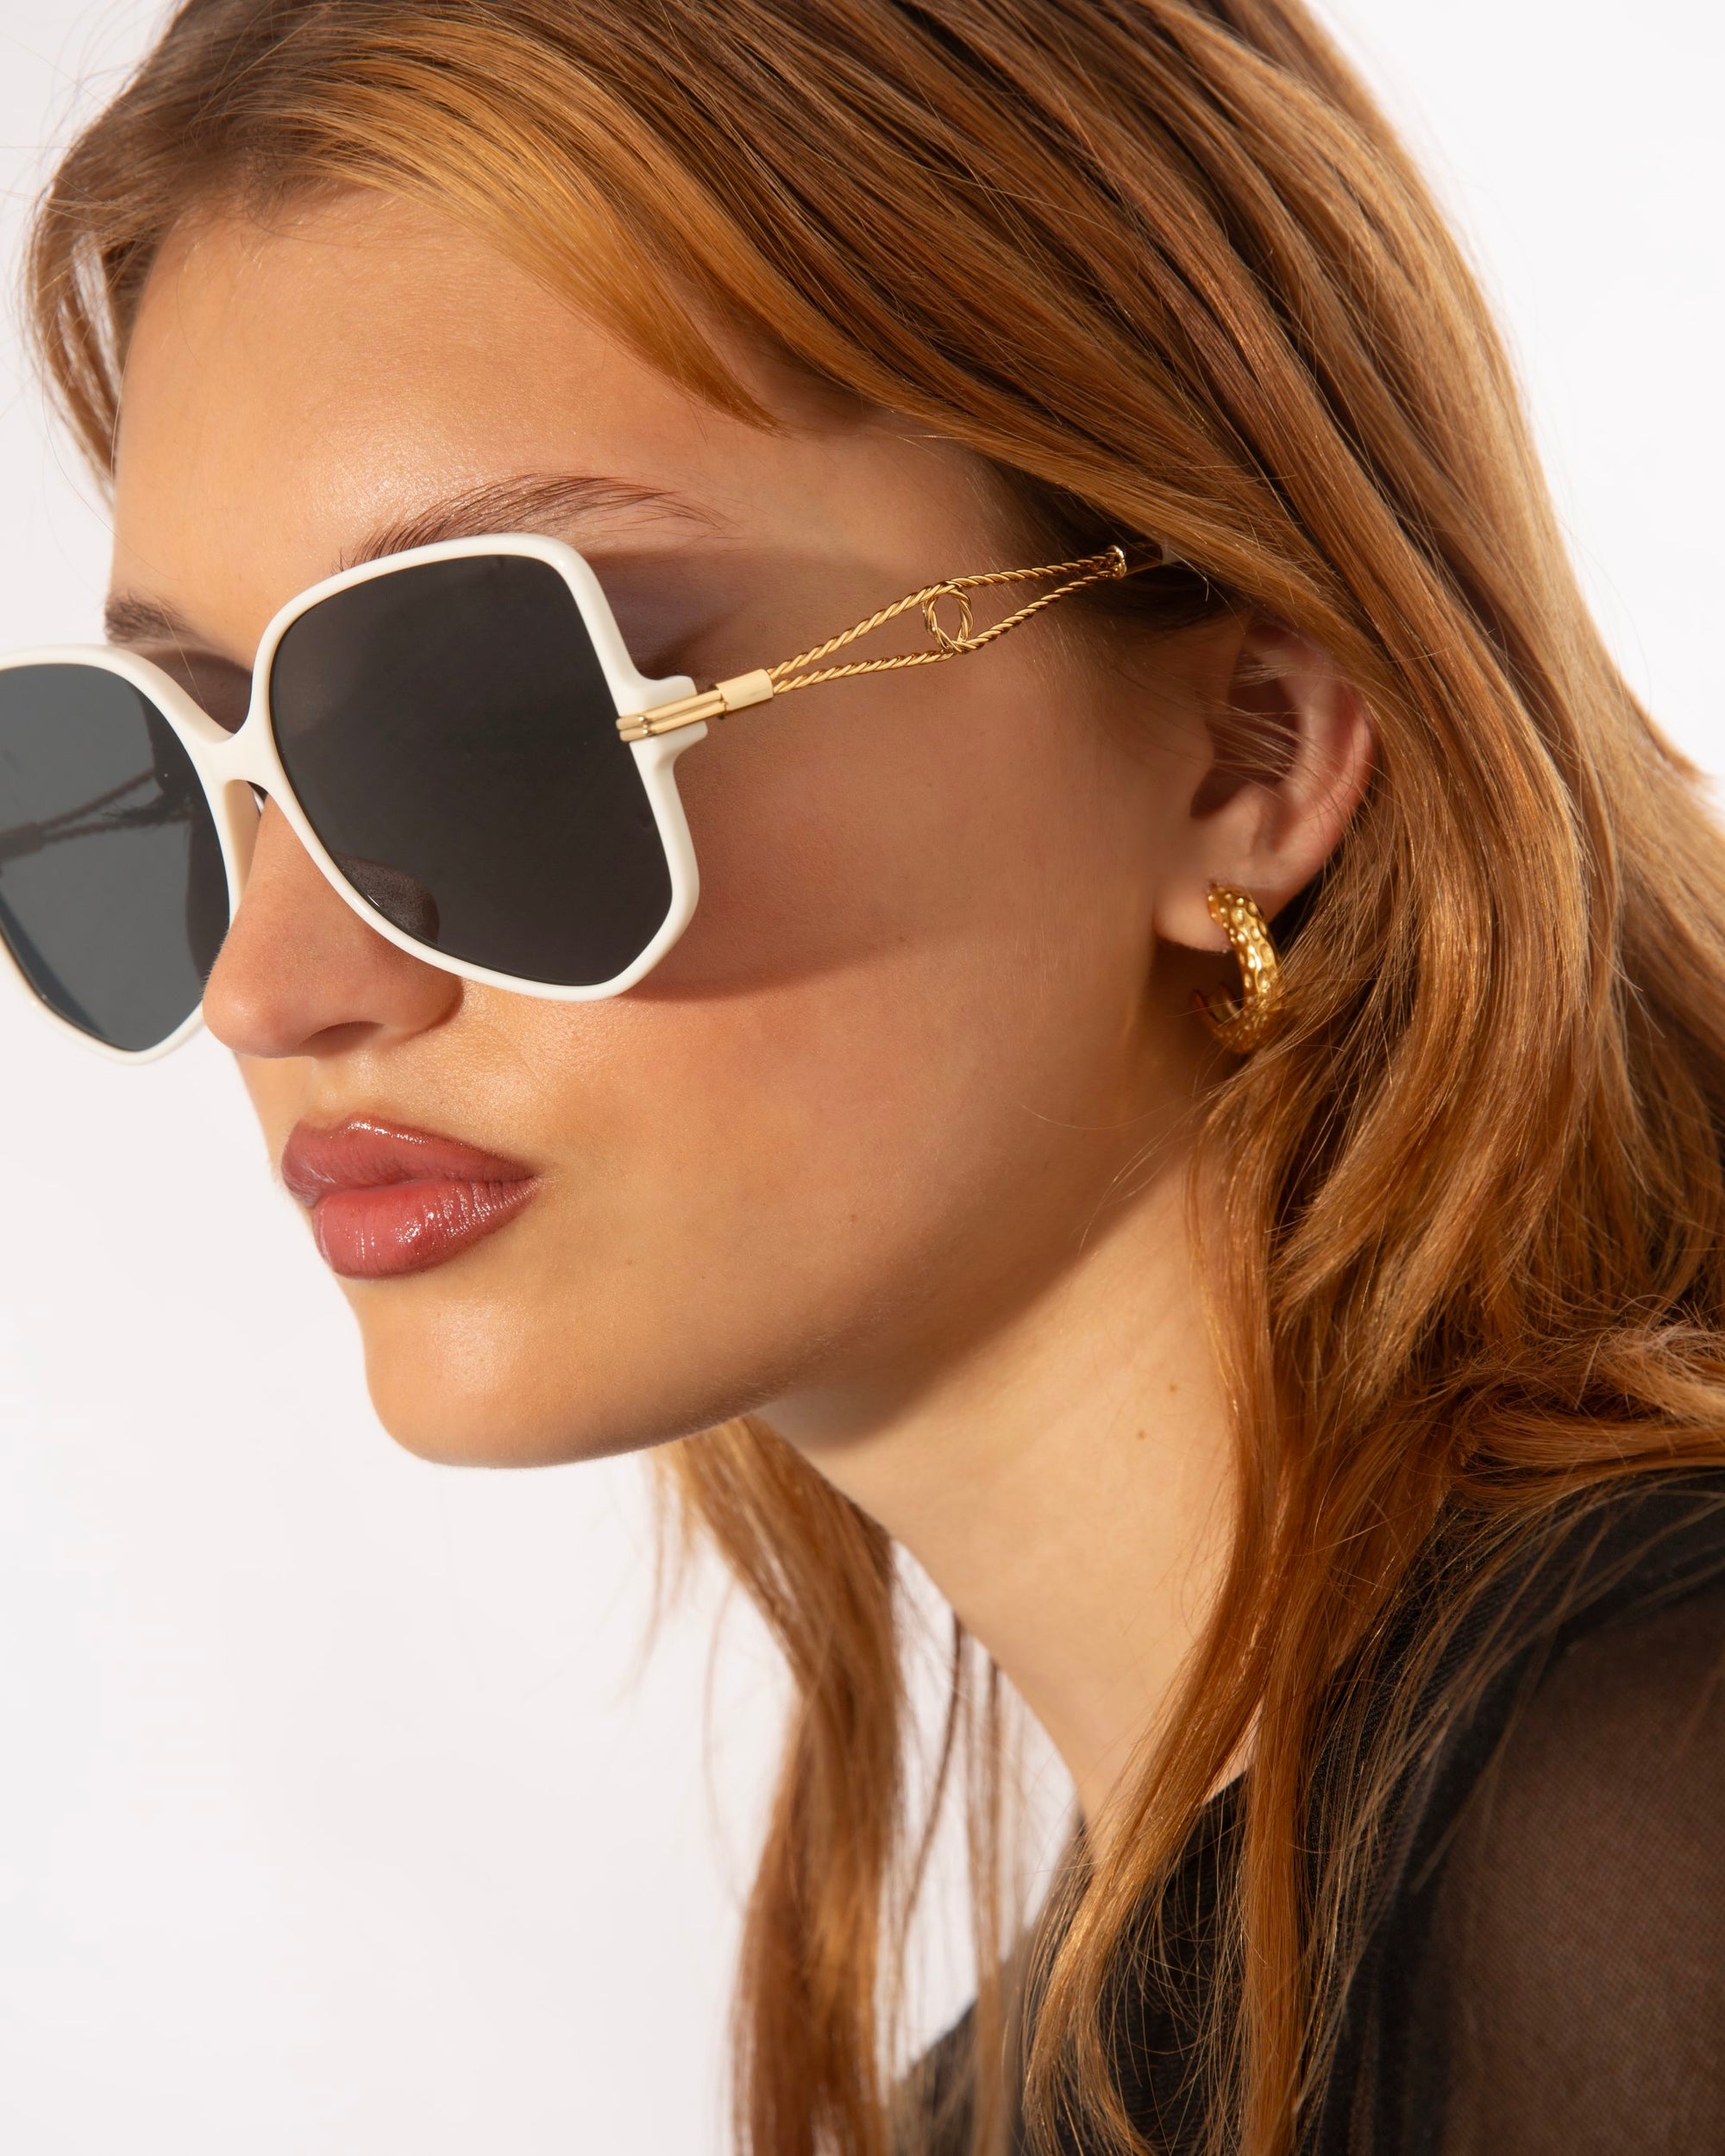 A person with long, auburn hair wearing square, oversized For Art's Sake® Voyager sunglasses with black lenses and 18-karat gold-plated chains is shown in a close-up profile view. They have light skin and are also wearing gold hoop earrings. The background is plain and white.